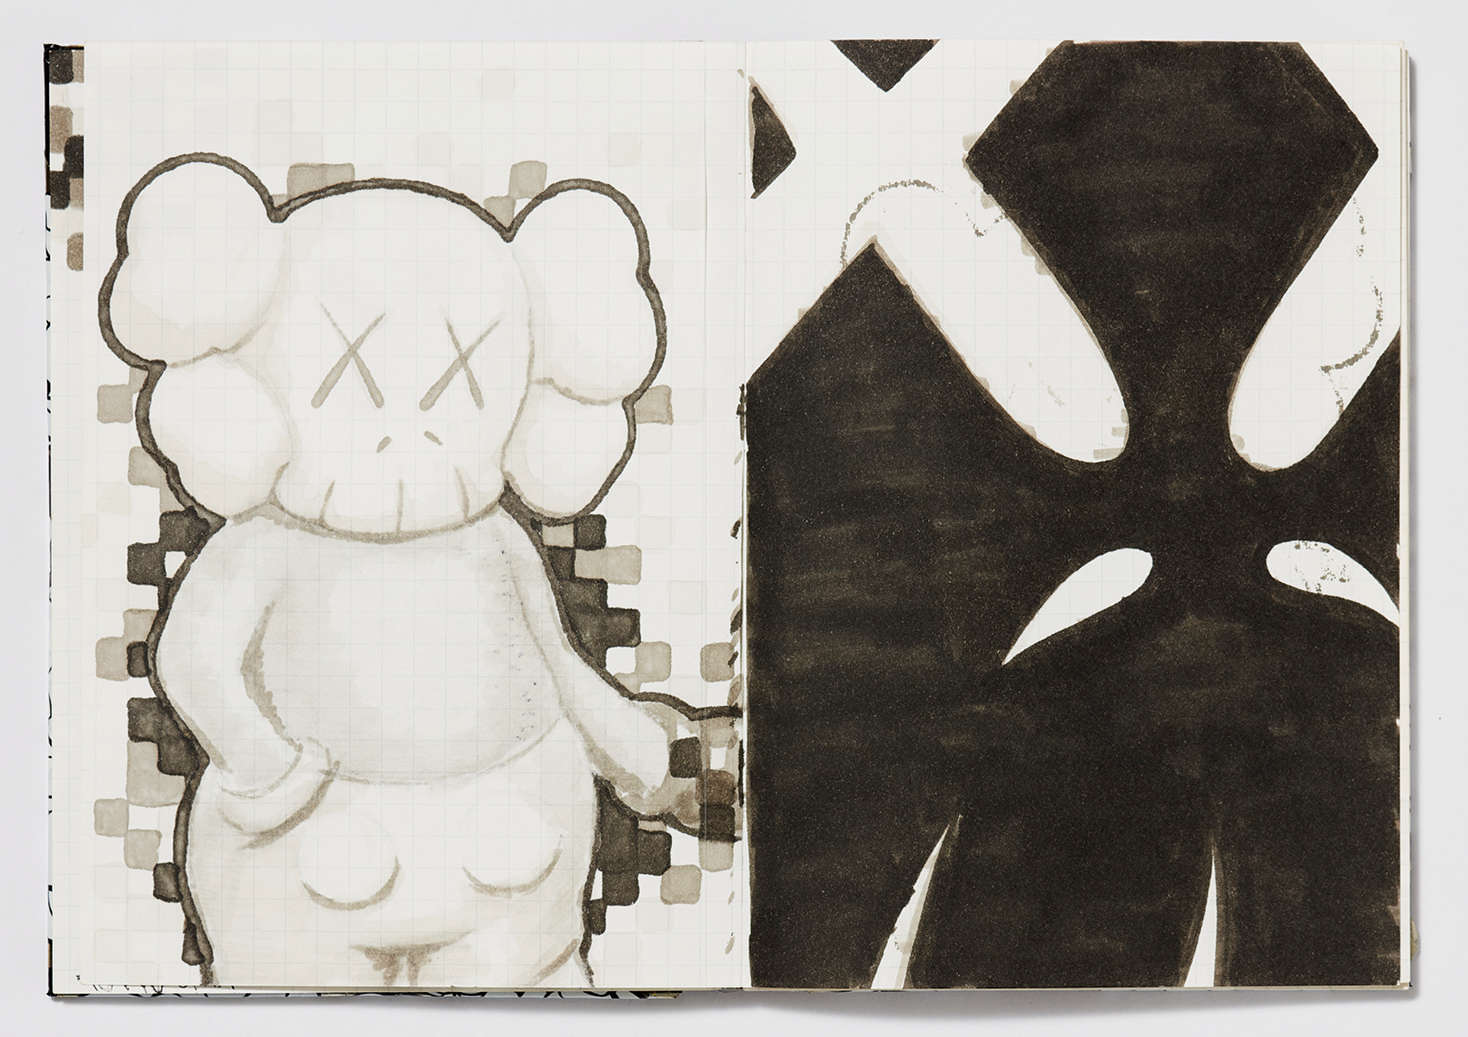 Interior spread from UNTITLED (Sketchbook), ca. 2000 – 2002, Ink on paper, Book. Photo Brad Bridgers / © KAWS 